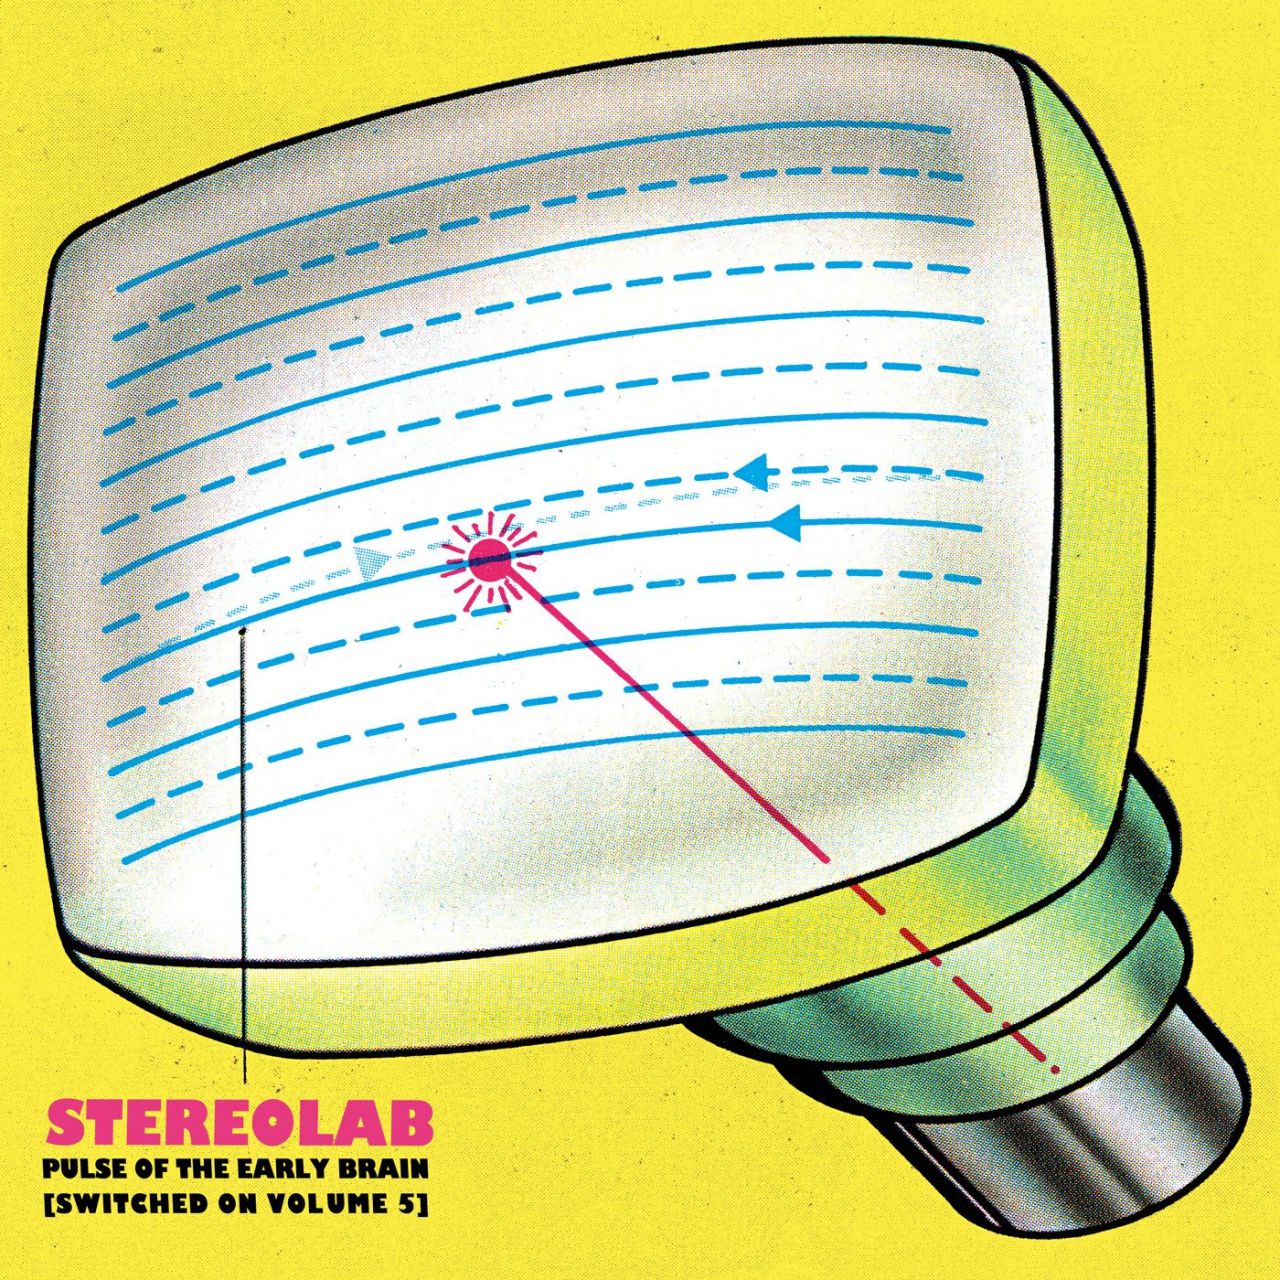 Stereolab - Pulse Of The Early Brain [Switched On Volume 5] - 3LP